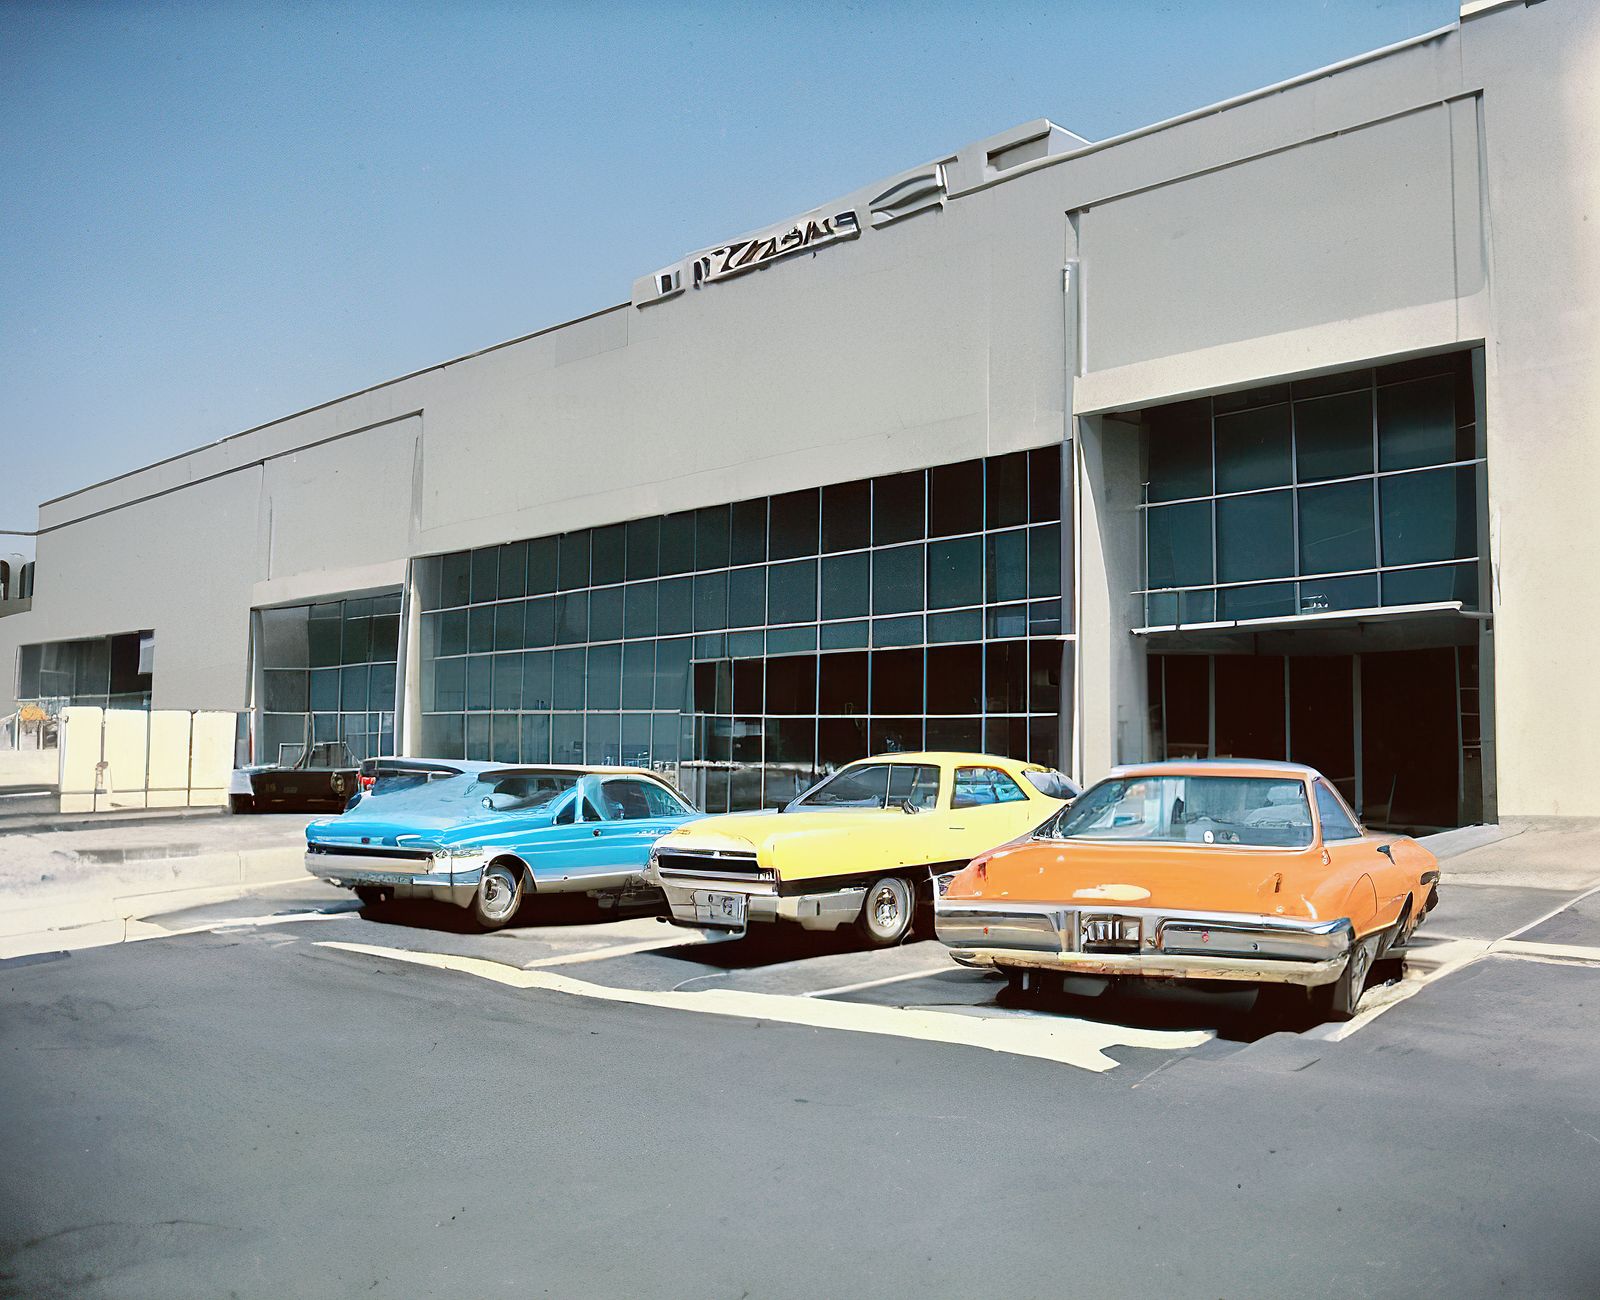 © Craig Ames - South Wall, Mazda Motors, 2121 East Main Street, Irvine. (Possibly After Lewis Baltz)